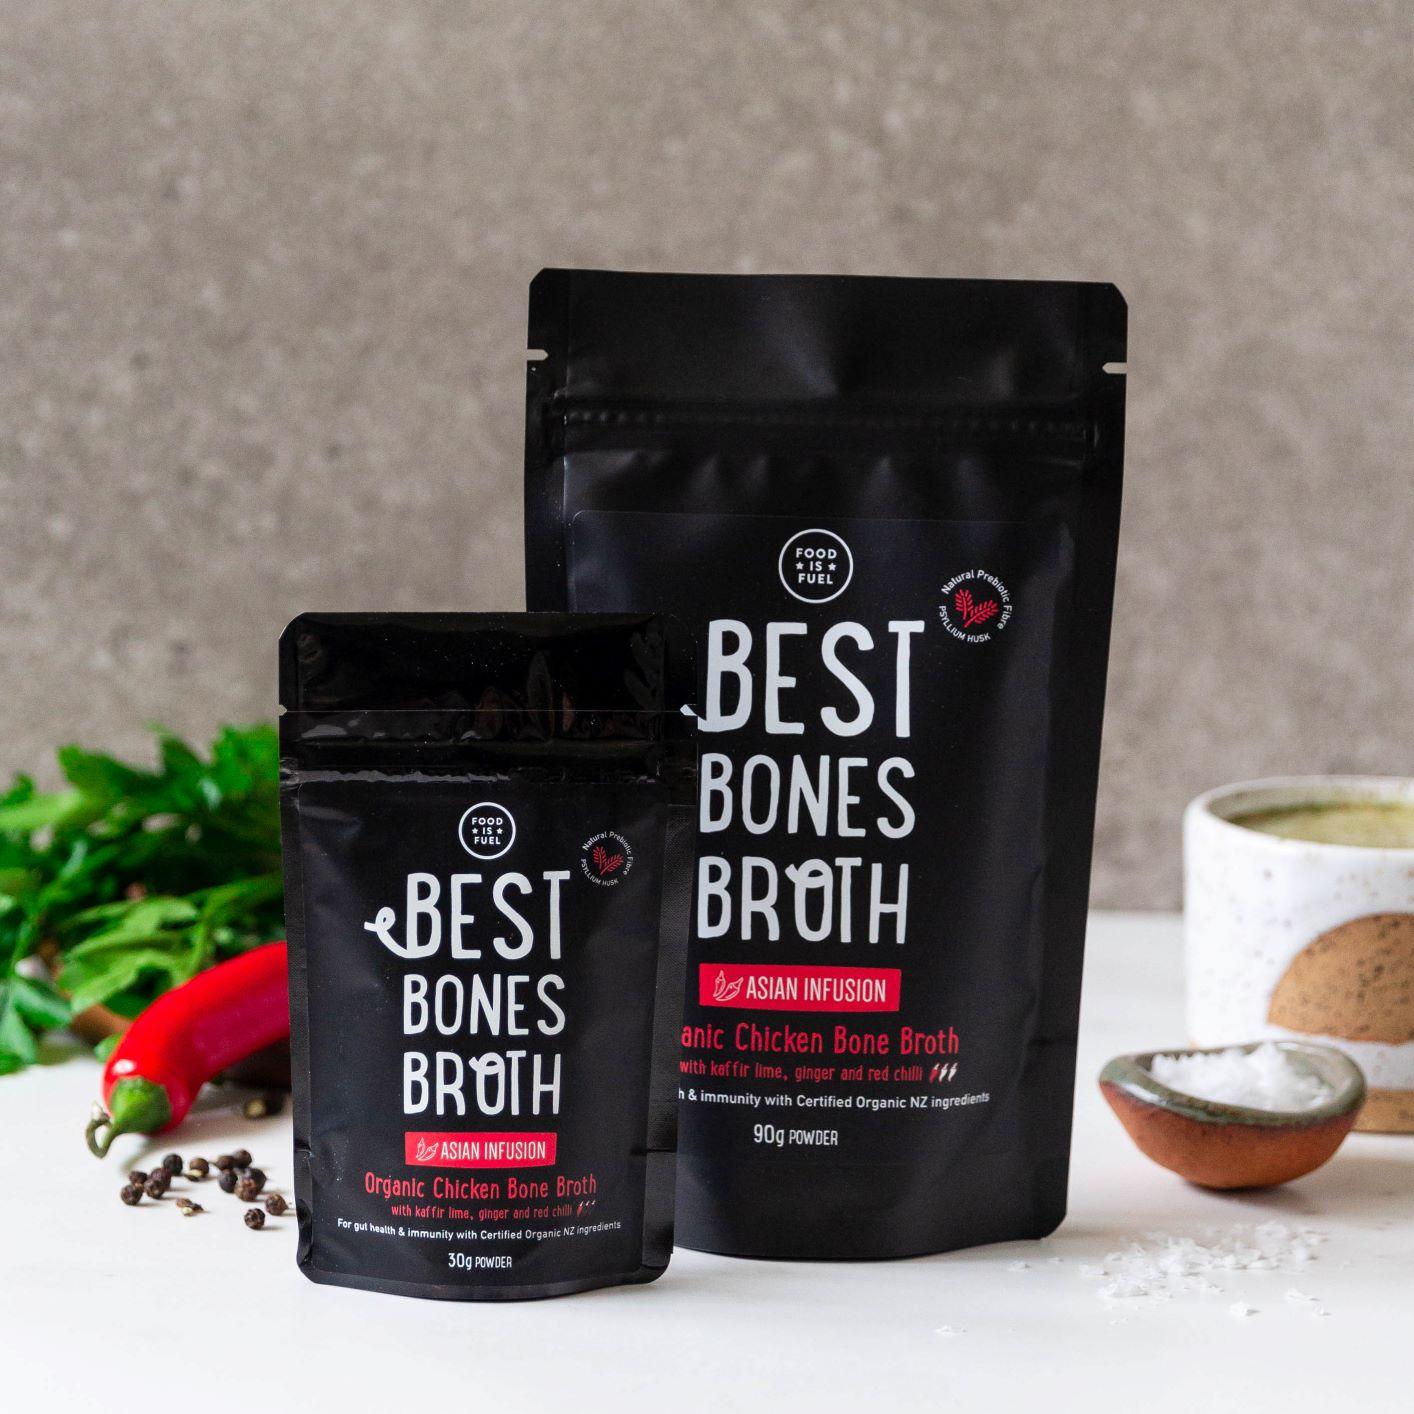 product image for Best Bones Broth Asian Infusion Blend